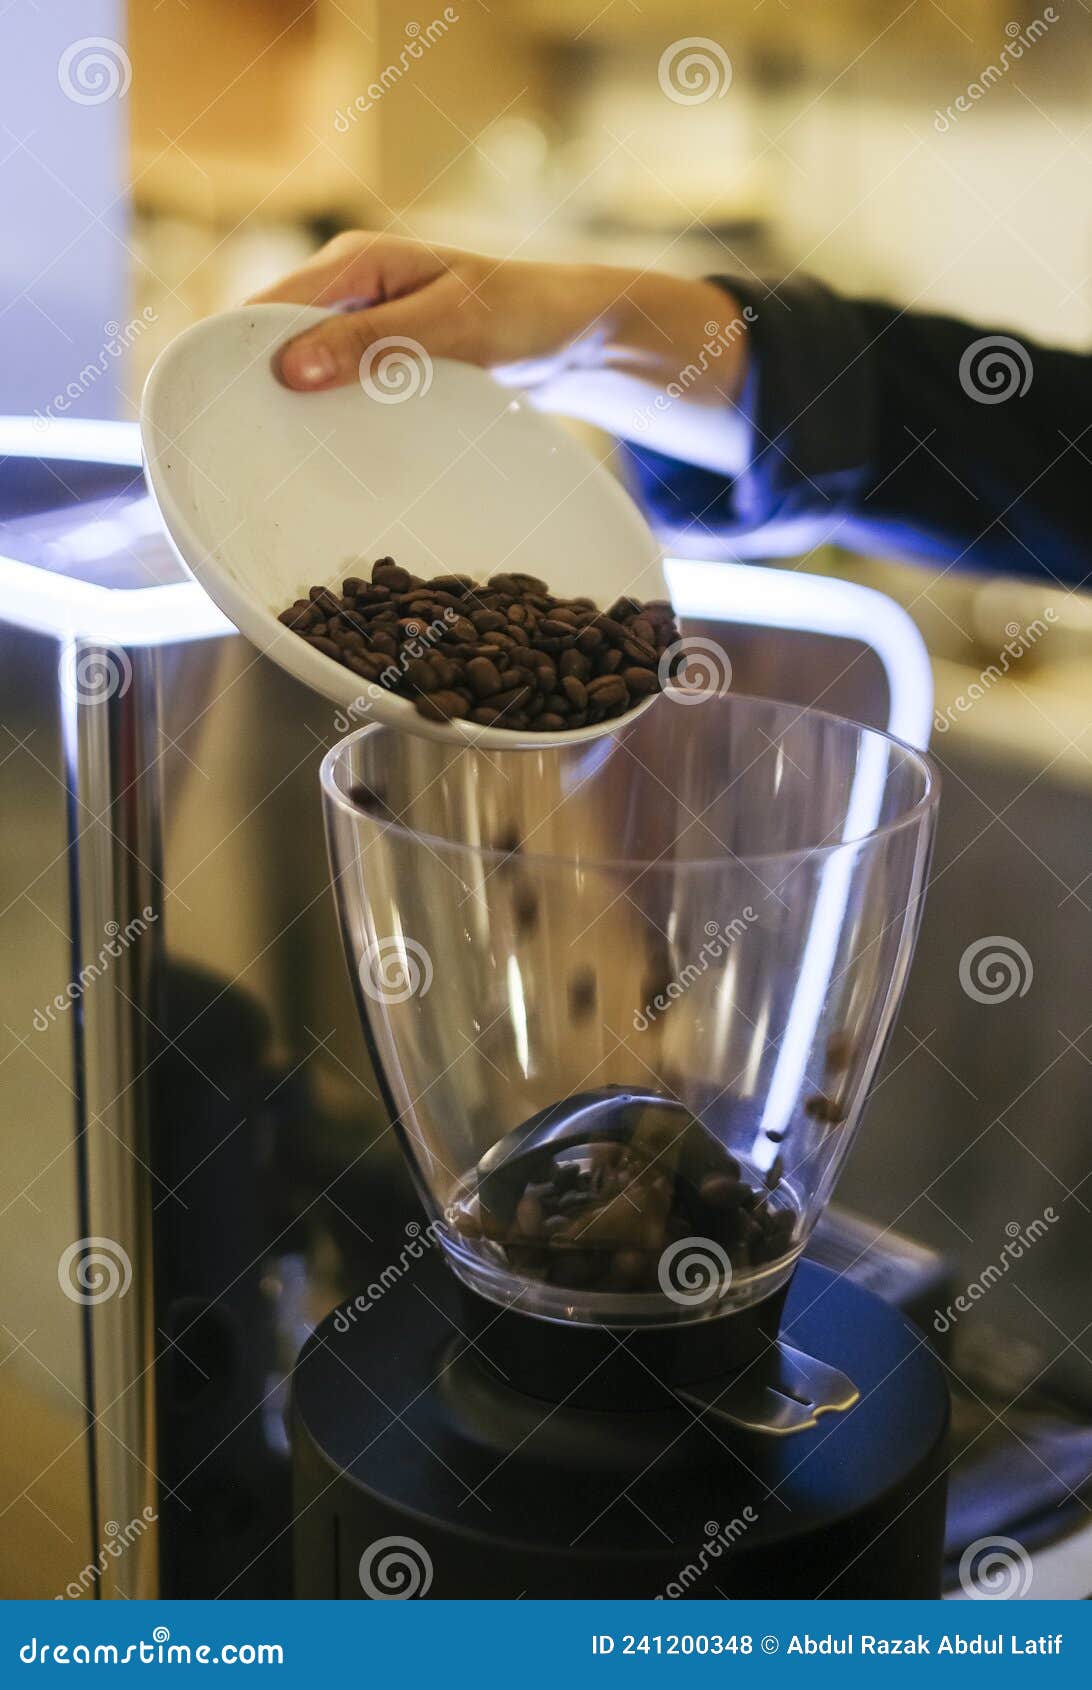 https://thumbs.dreamstime.com/z/professional-barista-puts-roasted-coffee-beans-grinder-machine-espresso-brewing-process-241200348.jpg